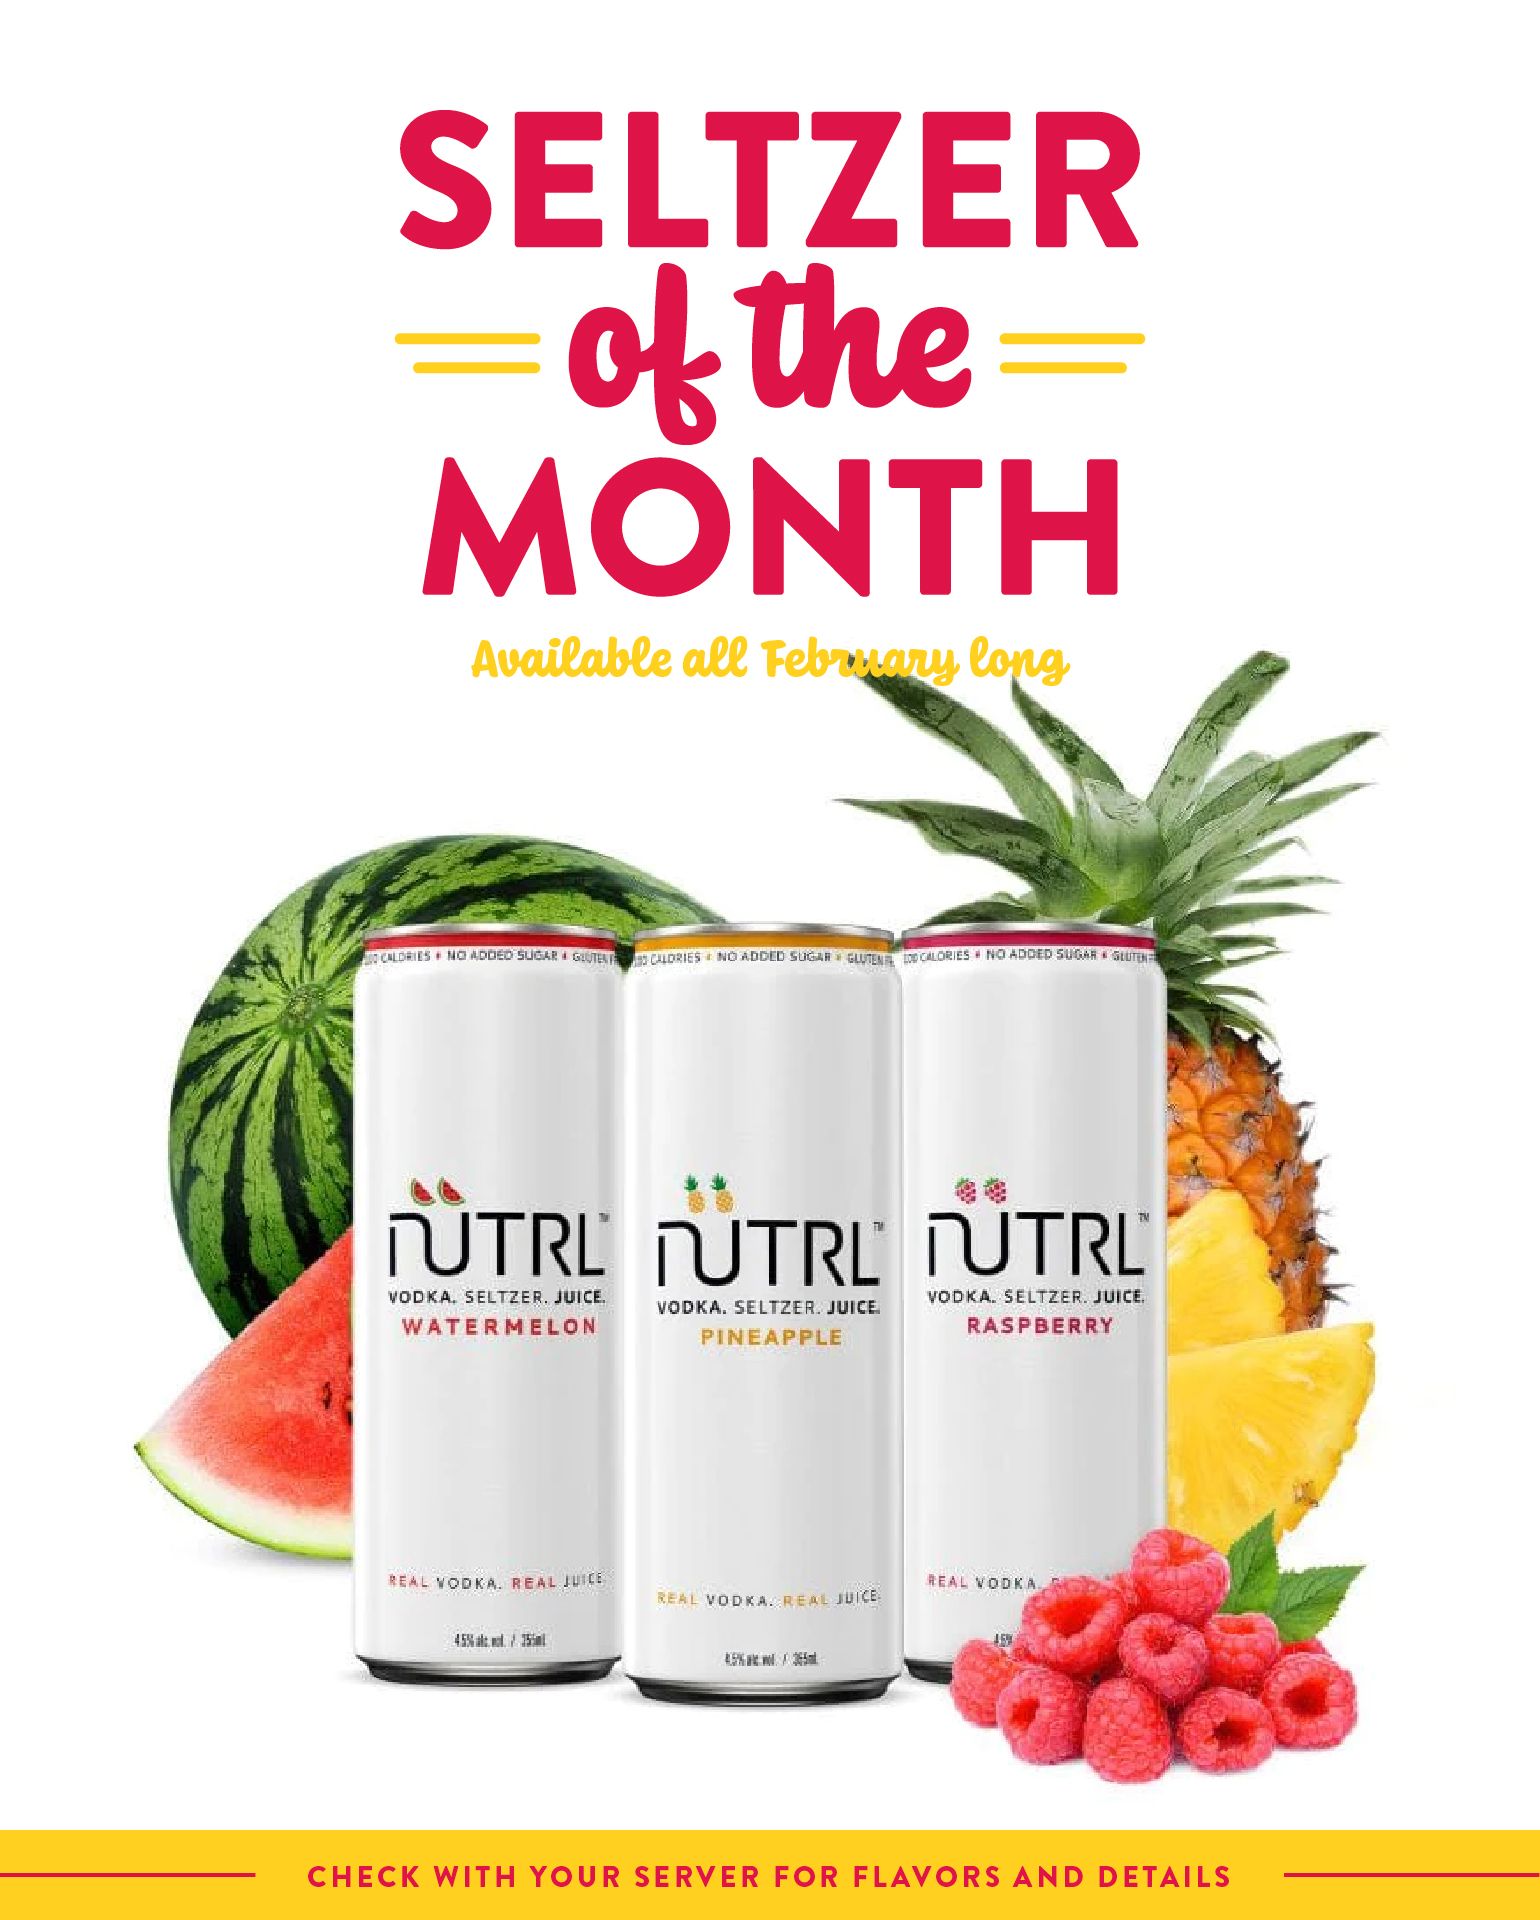 SELTZER of the MONTH – NUTRL